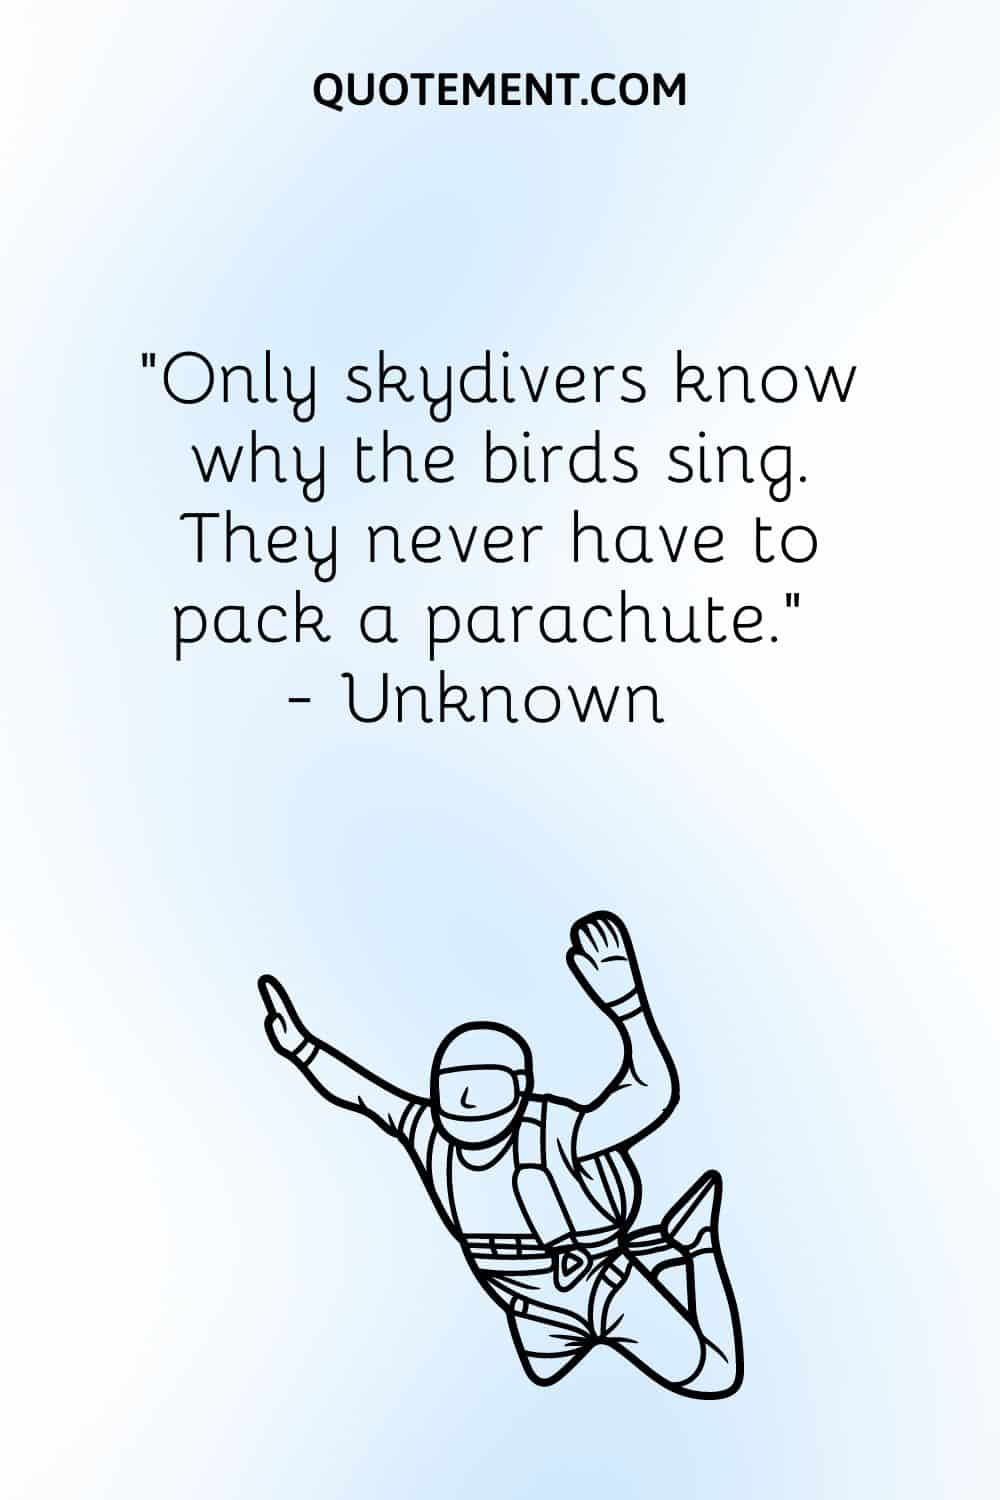 Only skydivers know why the birds sing. They never have to pack a parachute